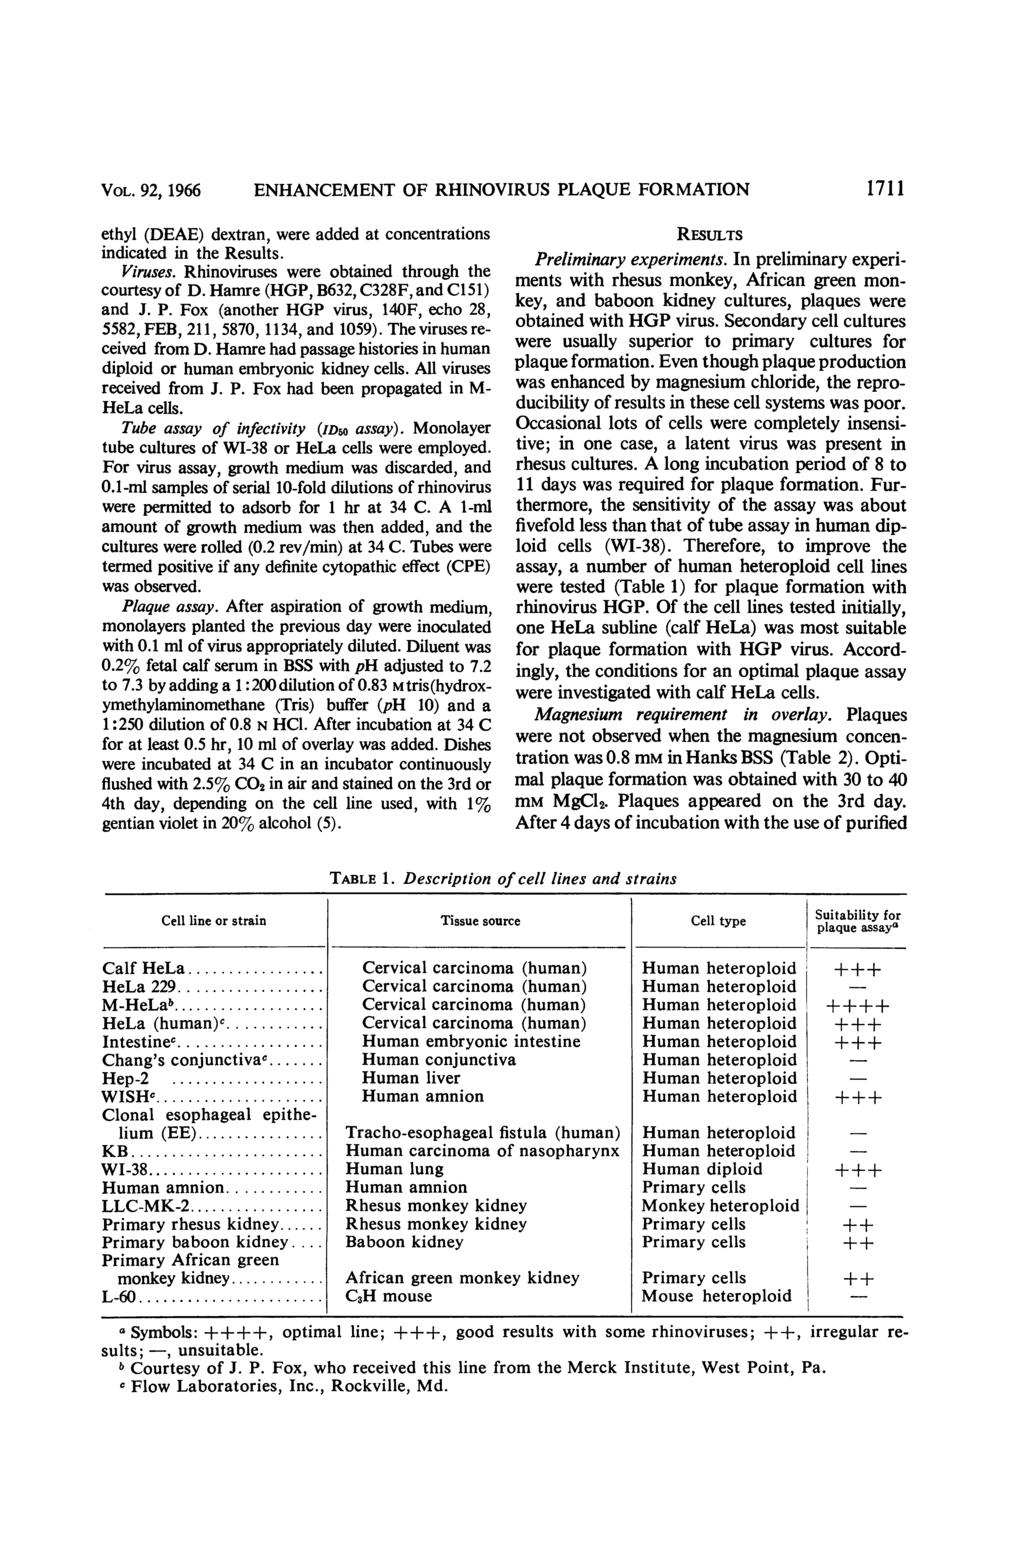 VOL. 92, 1966 ENHANCEMENT OF RHINOVIRUS PLAQUE FORMATION 1711 ethyl (DEAE) dextran, were added at concentrations indicated in the Results. Viruses.